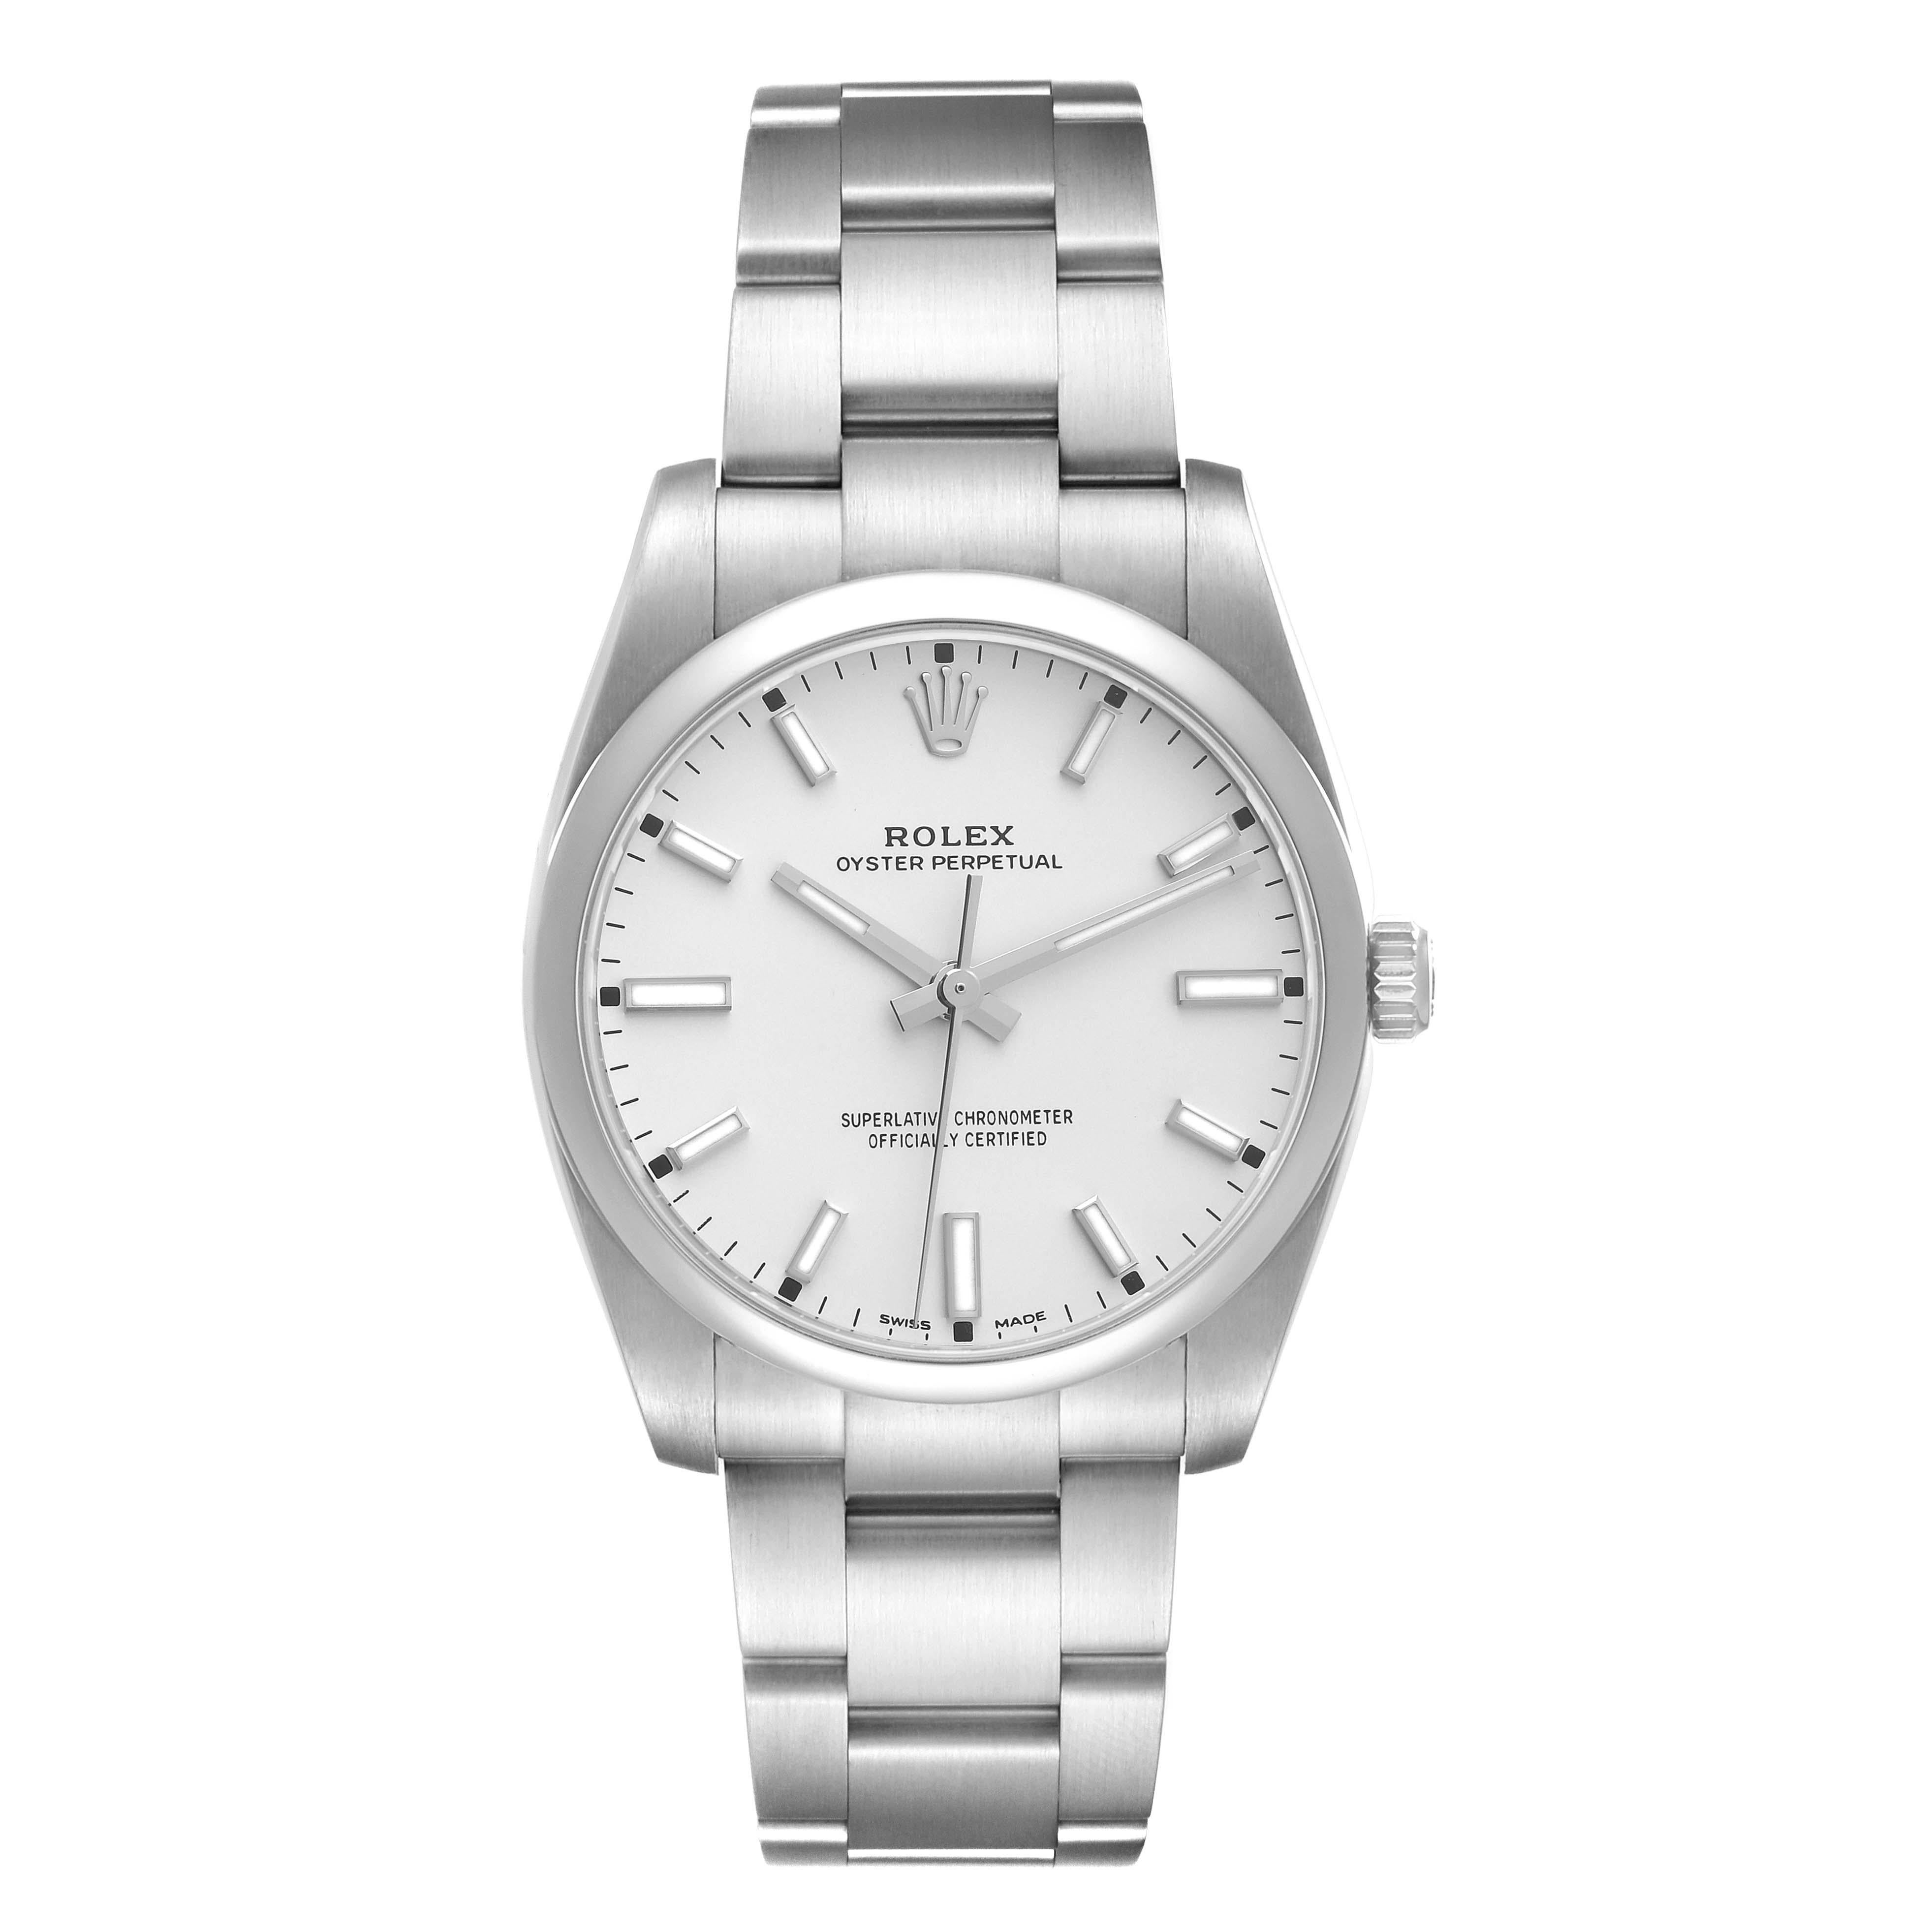 Rolex Oyster Perpetual Silver Dial Smooth Bezel Mens Watch 114200 Box Card. Officially certified chronometer self-winding movement. Stainless steel case 34 mm in diameter. Rolex logo on a crown. Stainless steel smooth domed bezel. Scratch resistant